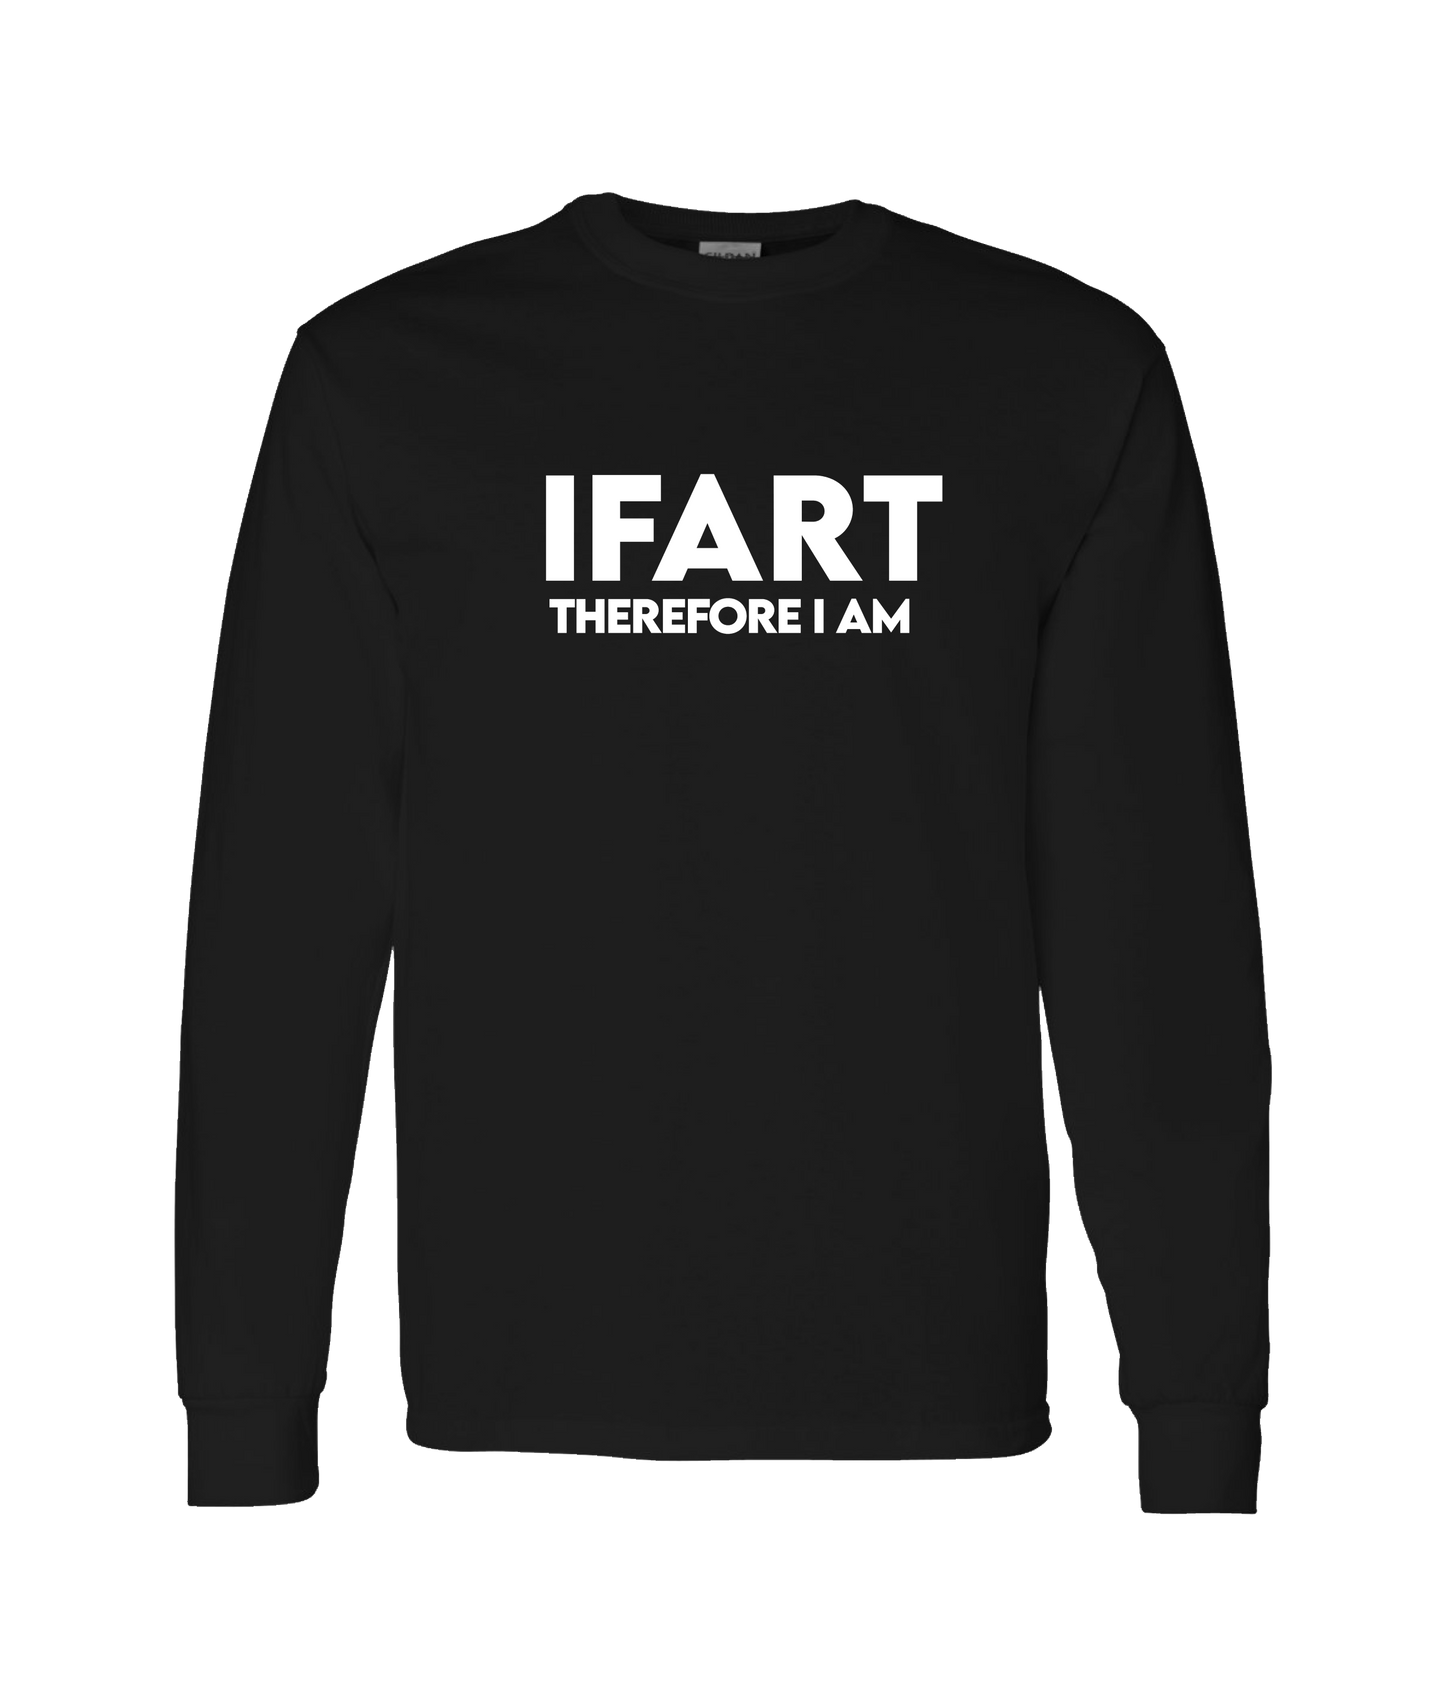 iFart - THEREFORE I AM - Black Long Sleeve T